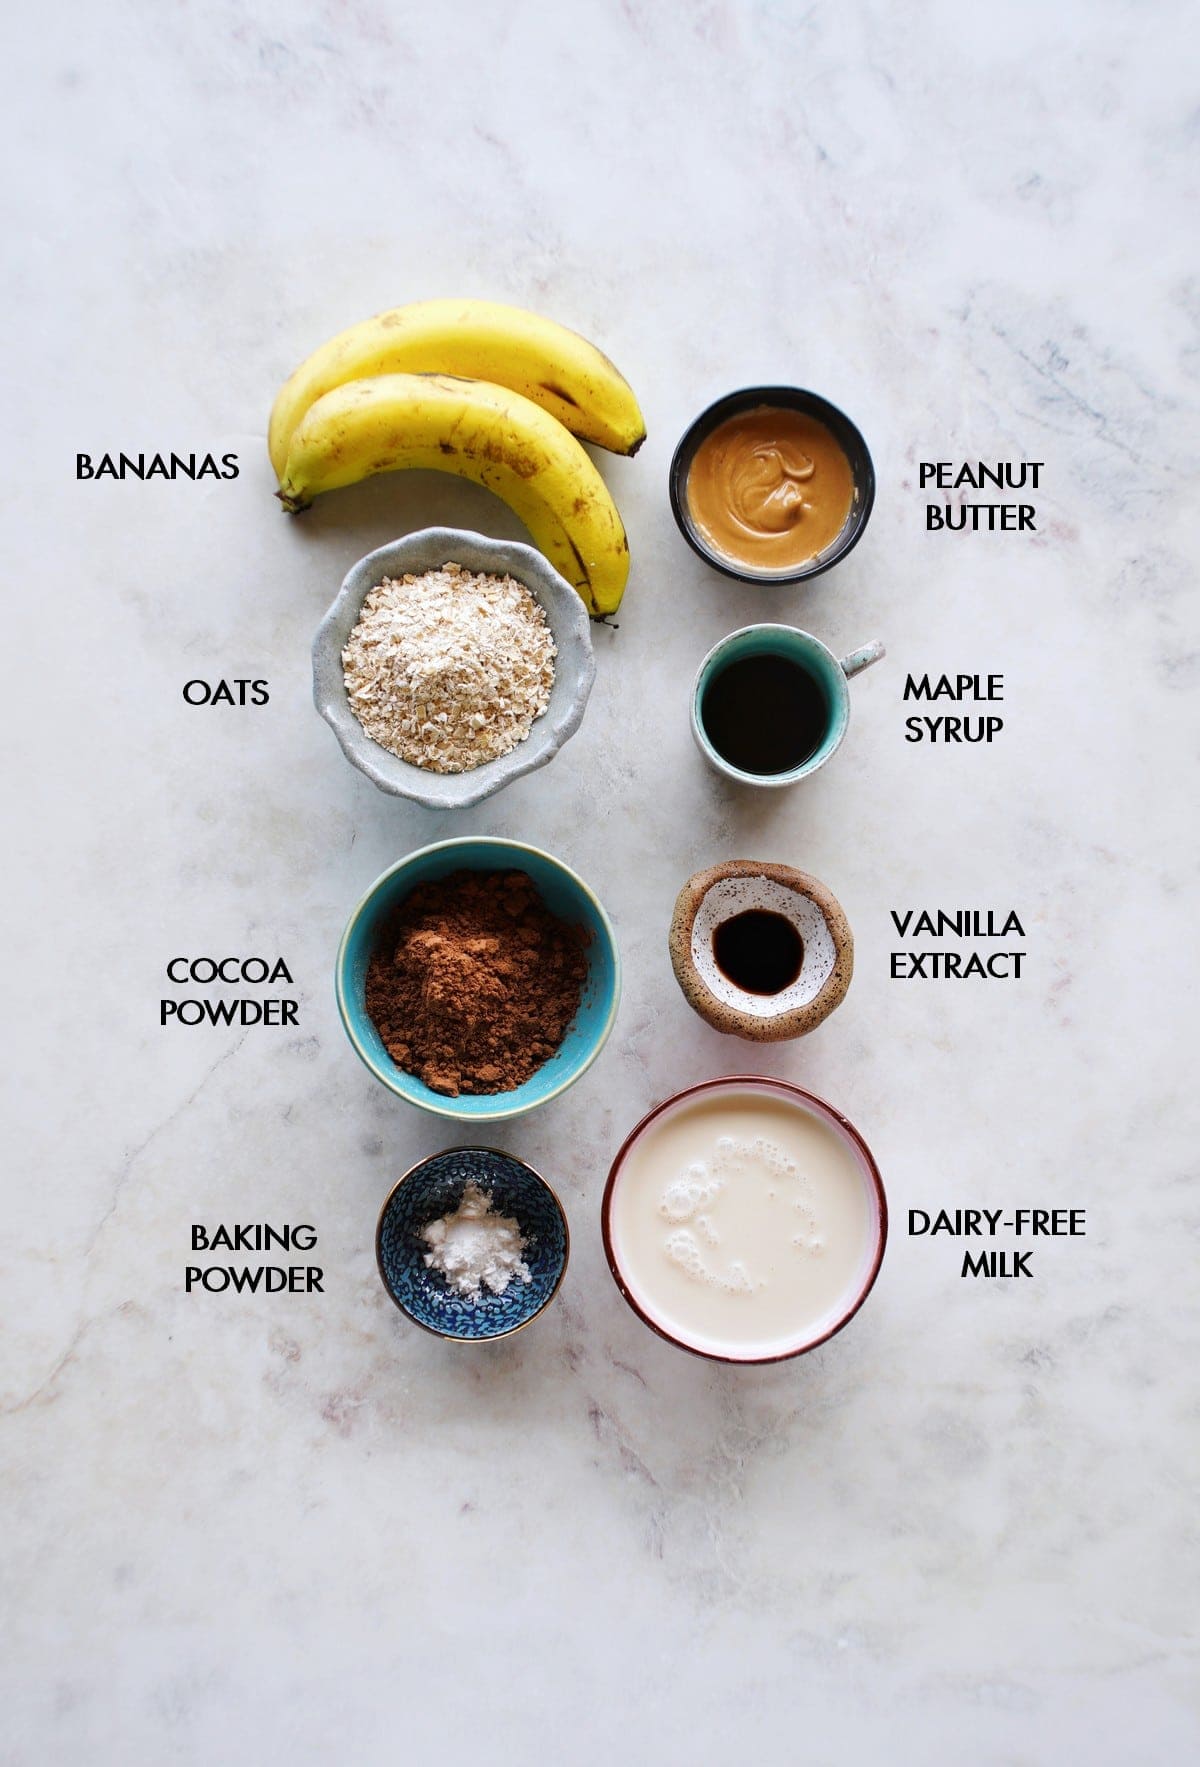 ingredients for chocolate baked oats